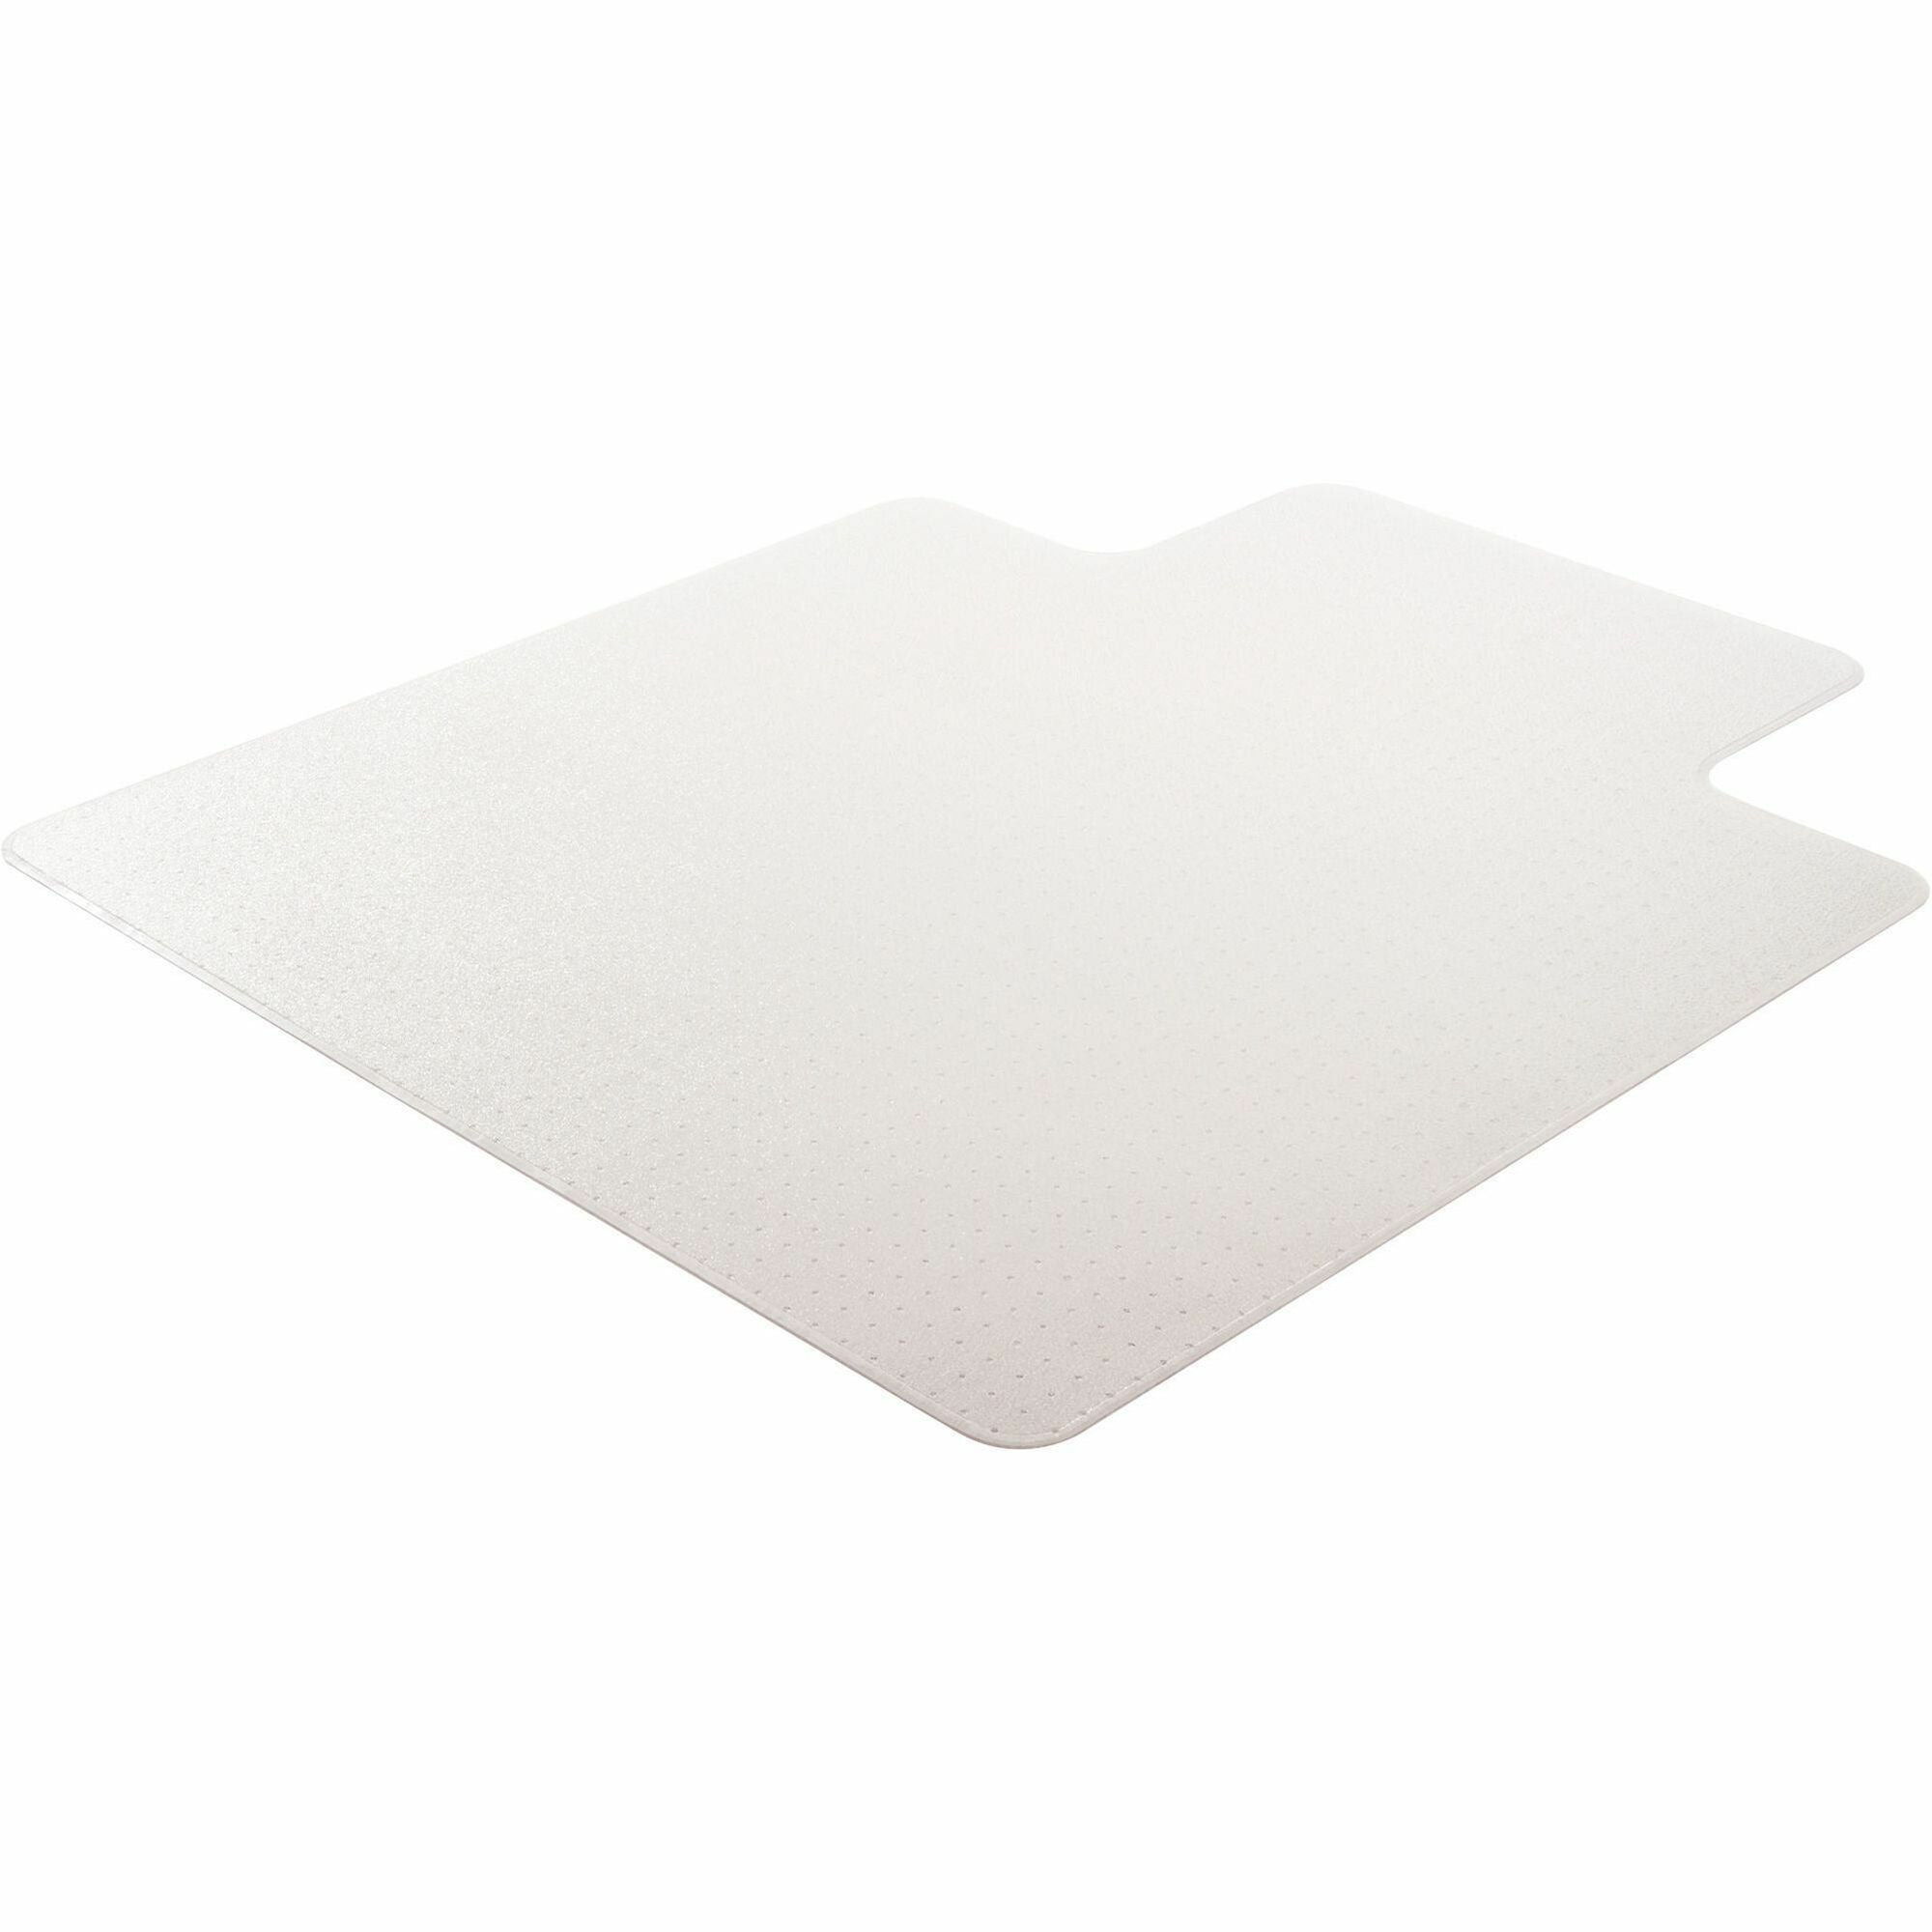 Lorell Plush-pile Wide-Lip Chairmat - Carpeted Floor - 60" Length x 46" Width x 0.173" Thickness - Lip Size 12" Length x 25" Width - Vinyl - Clear - 1Each - 